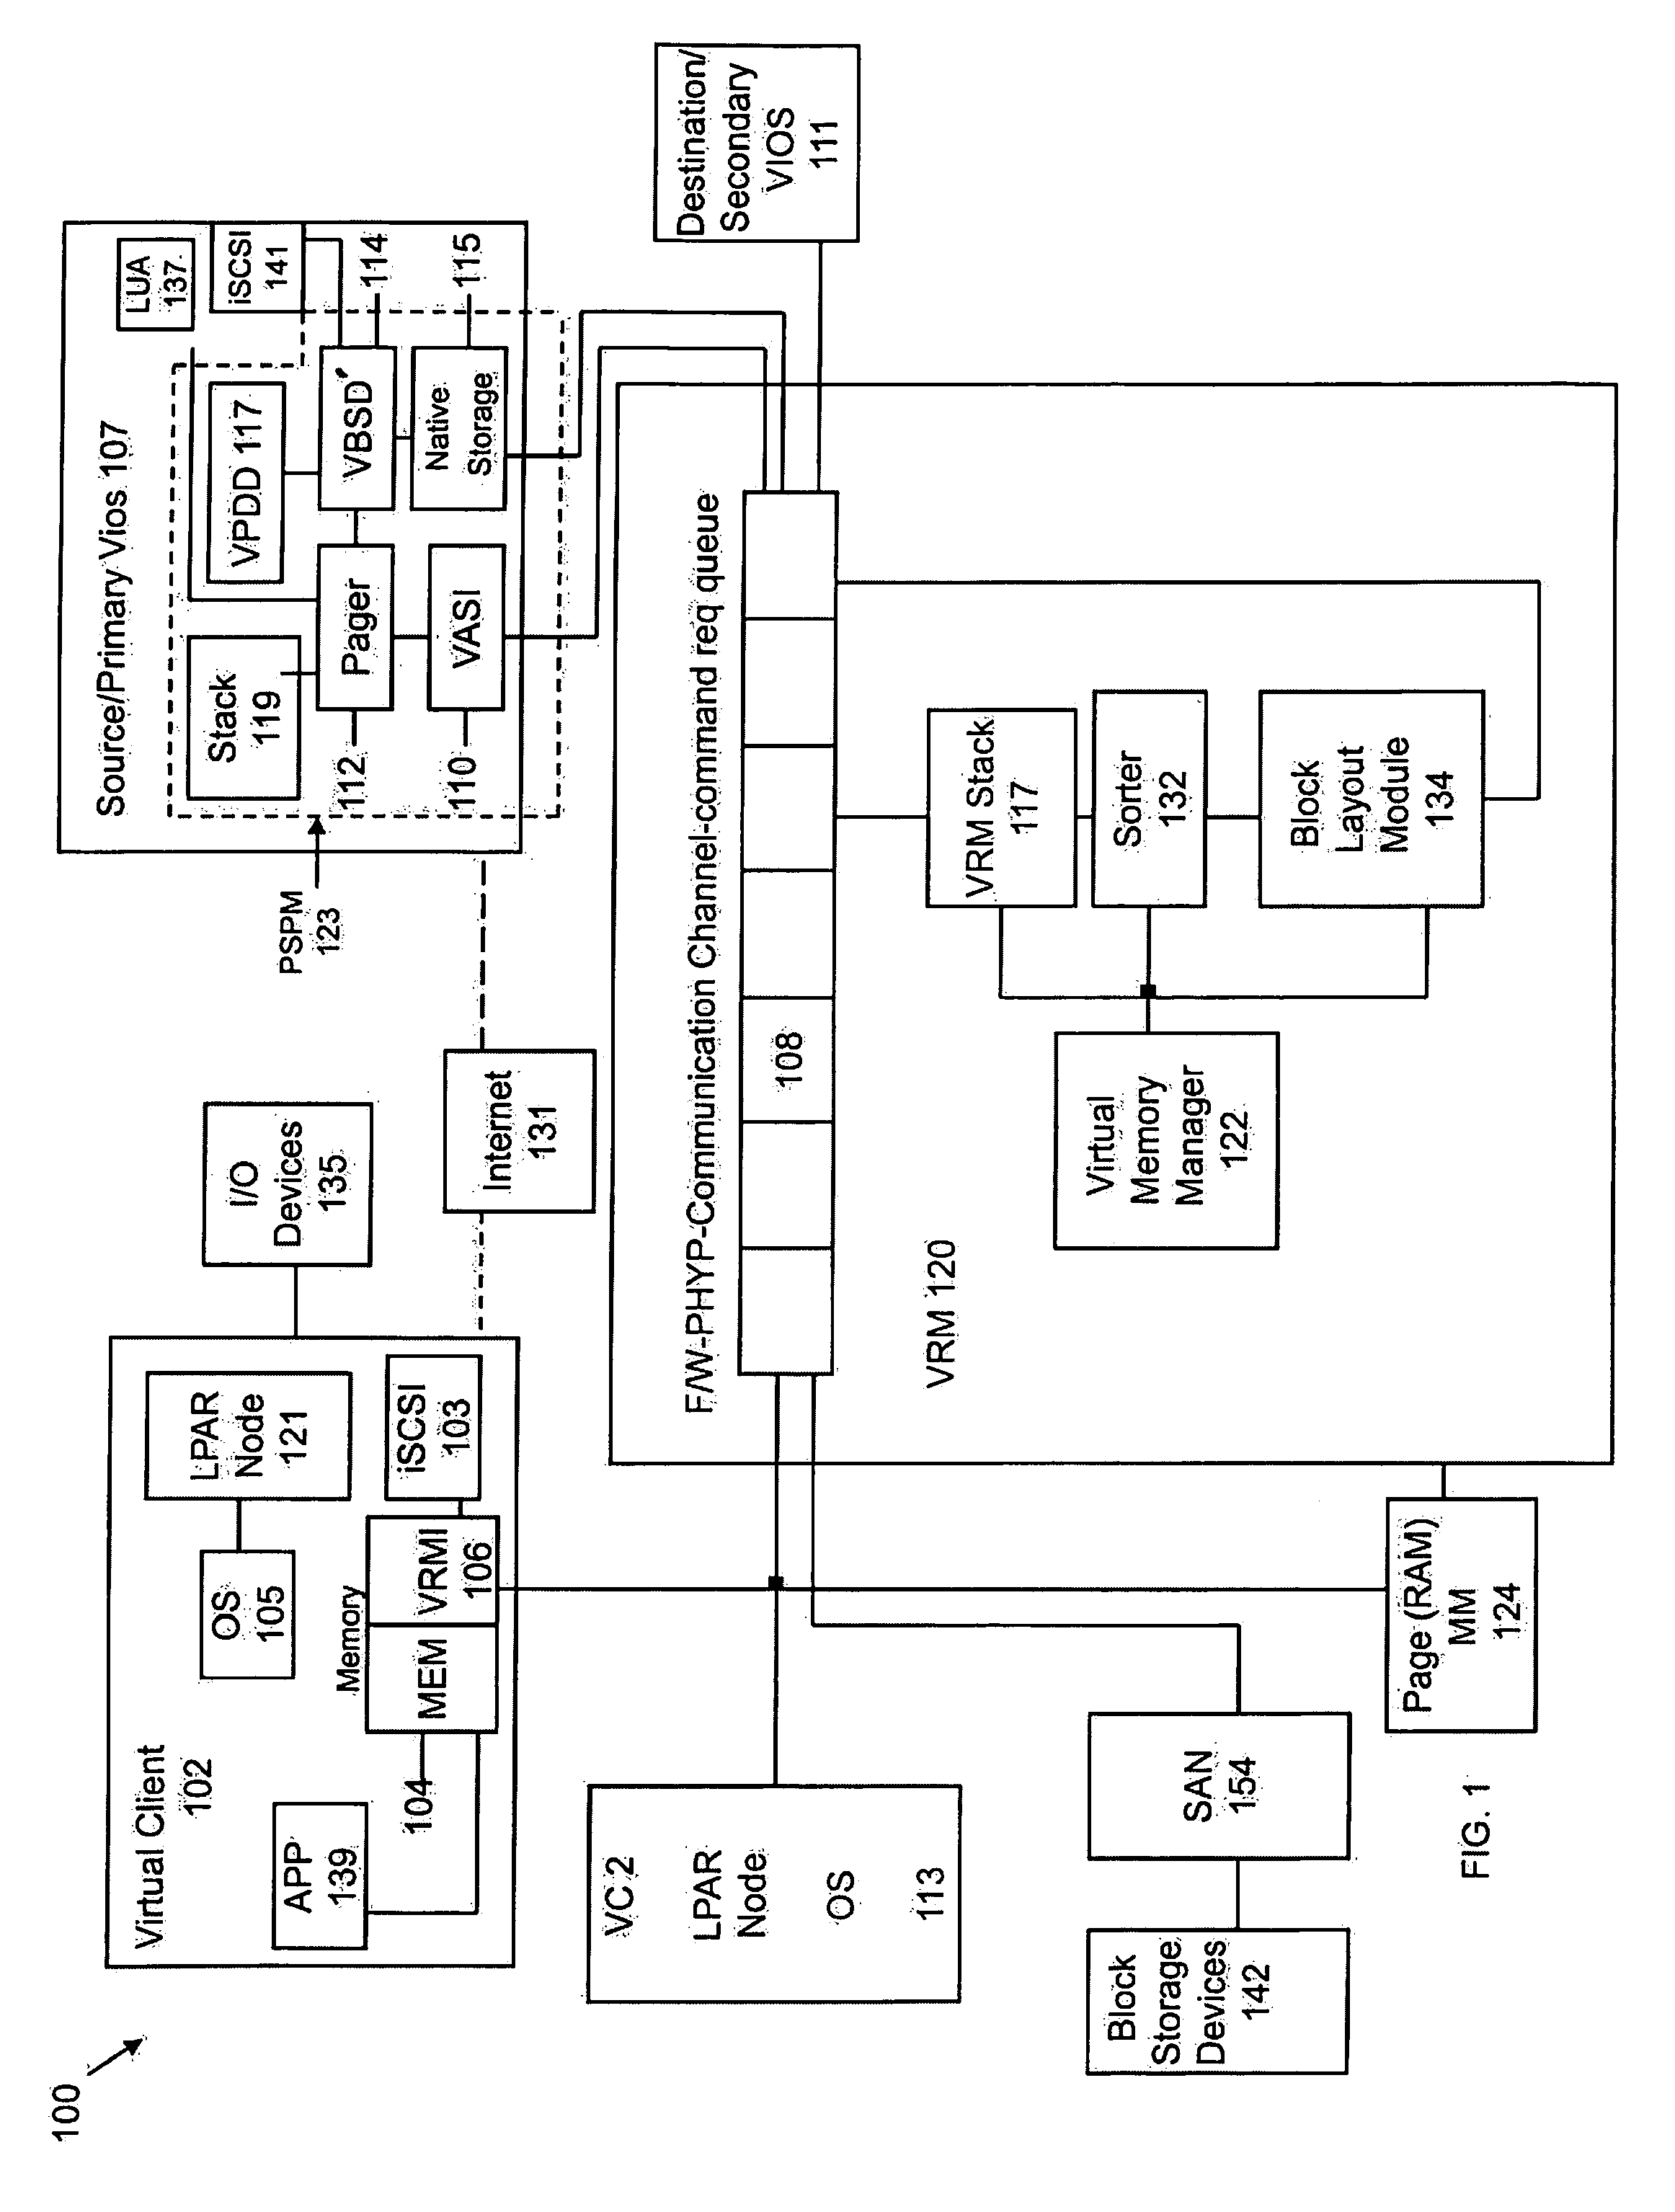 Arrangements for I/O Control in a Virtualized System